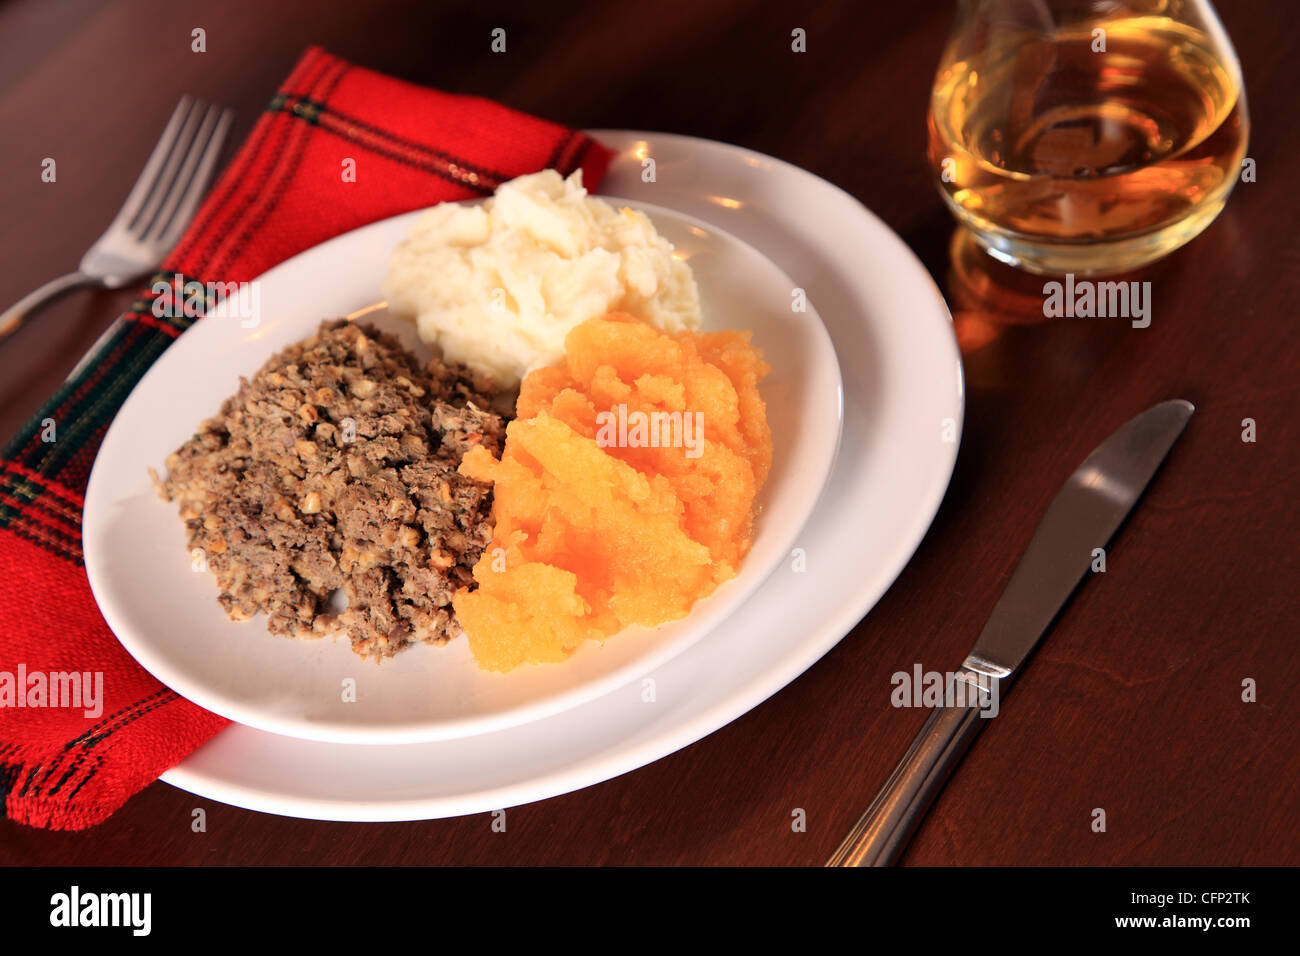 Scottish Haggis Table Setting For A Burns Night Dinner With A ...